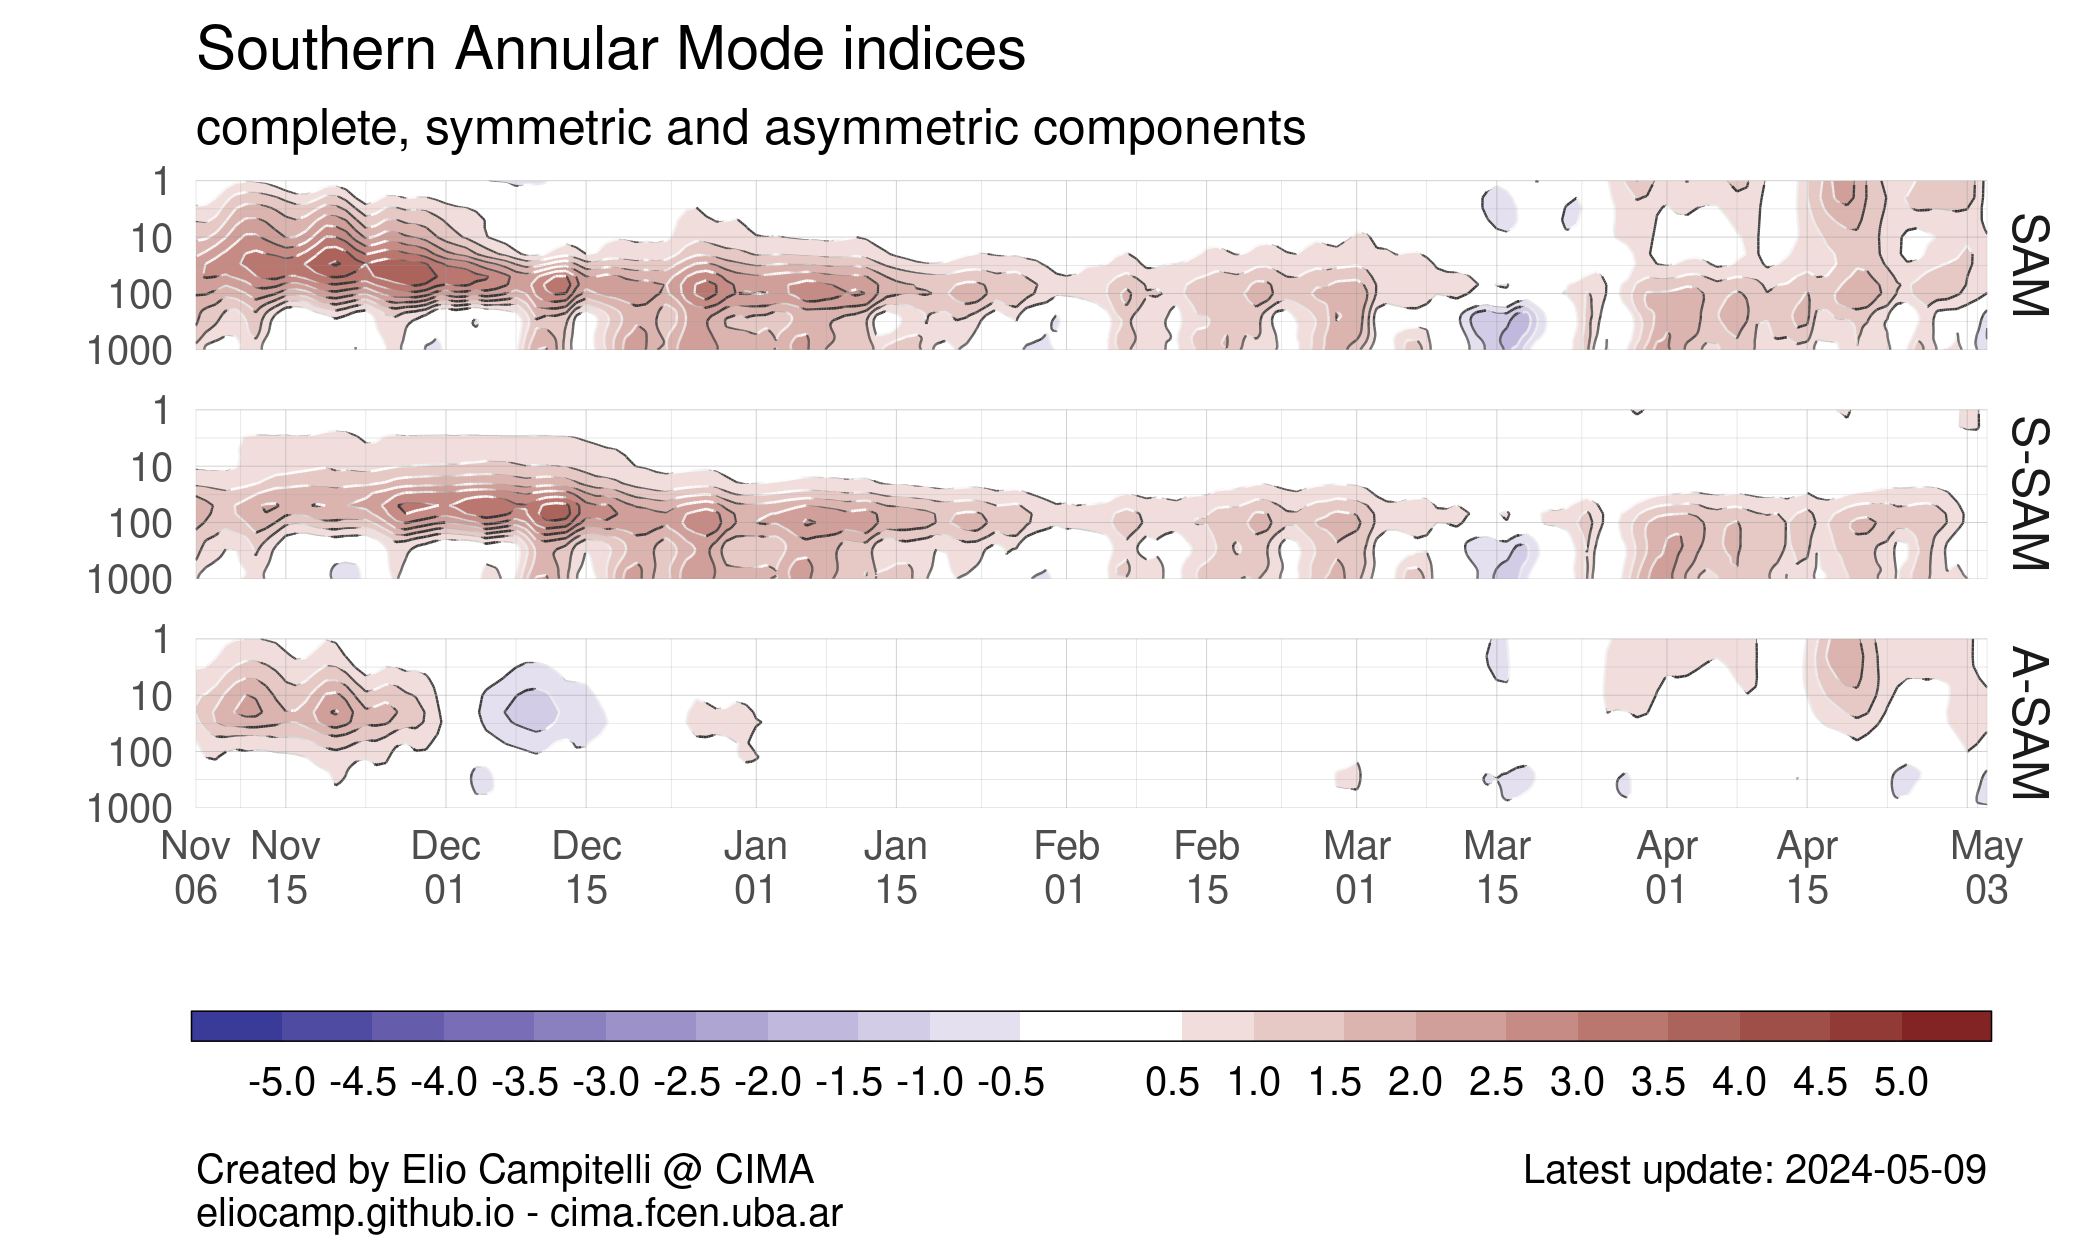 Vertical cross-section of the SAM, S-SAM and A-SAM indices for the last 6 months.